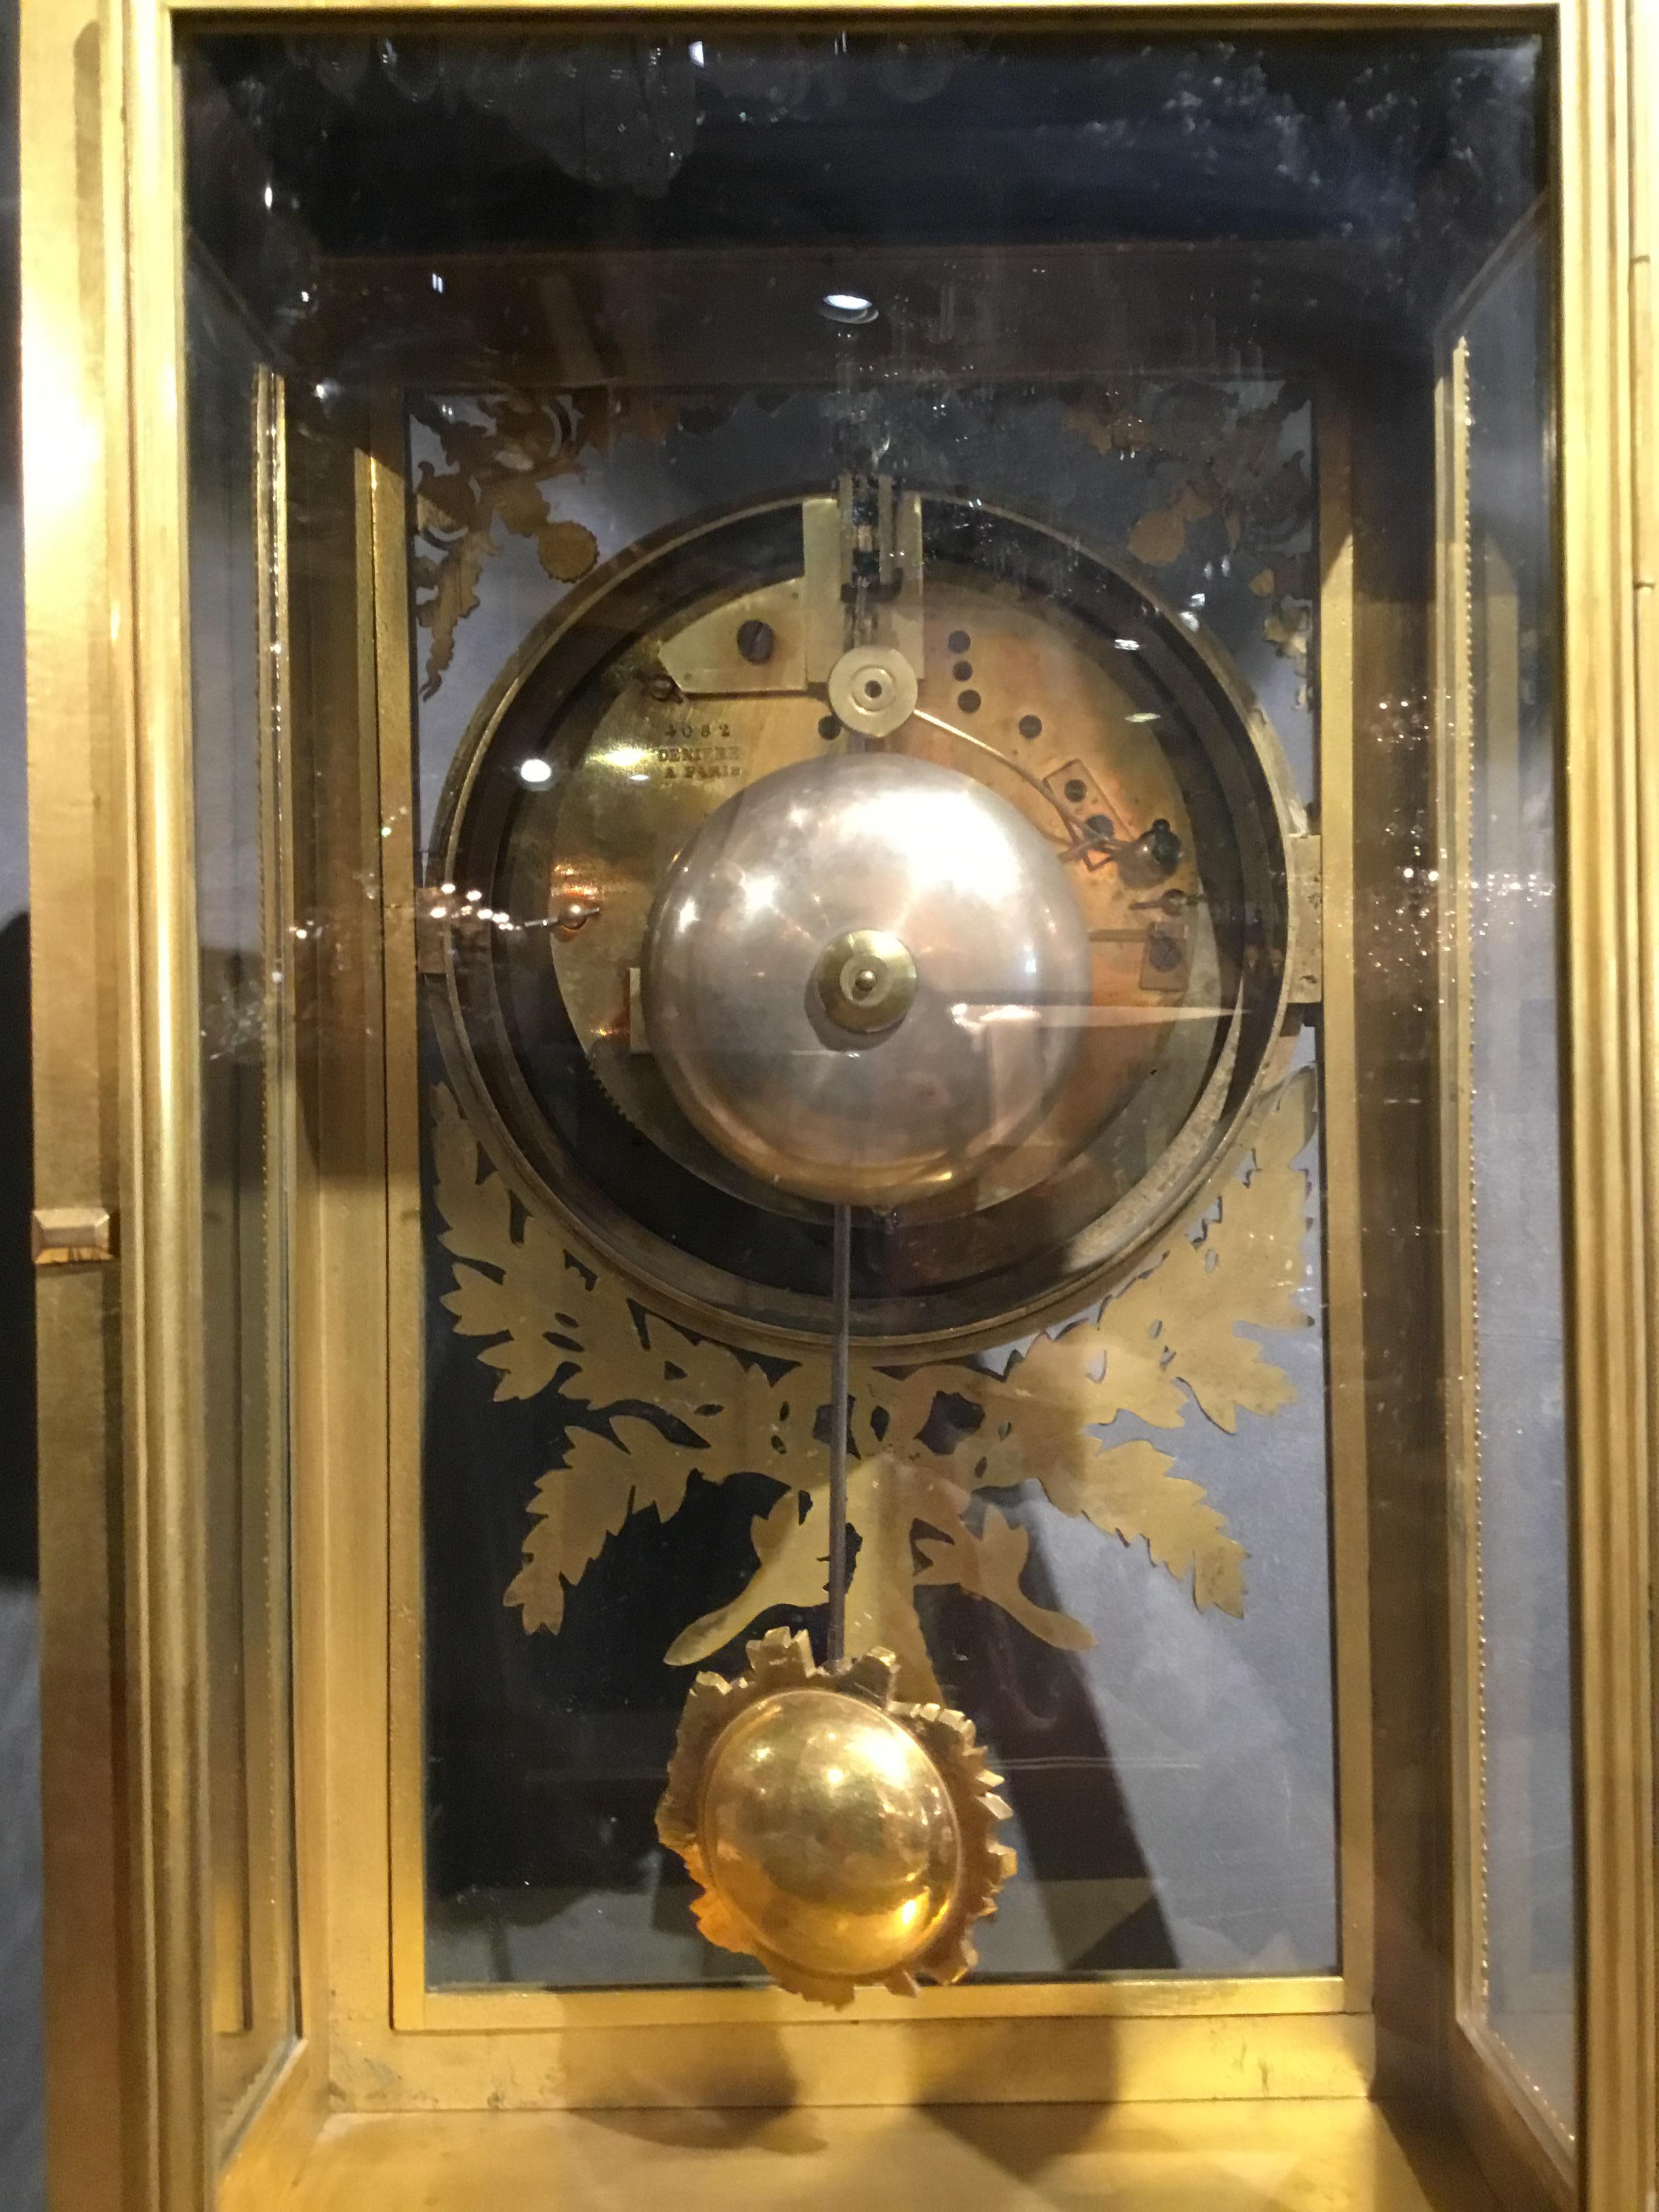 French Bronze Dore Mantel Clock, 19th Century by F. Berthoud with Open Escapement